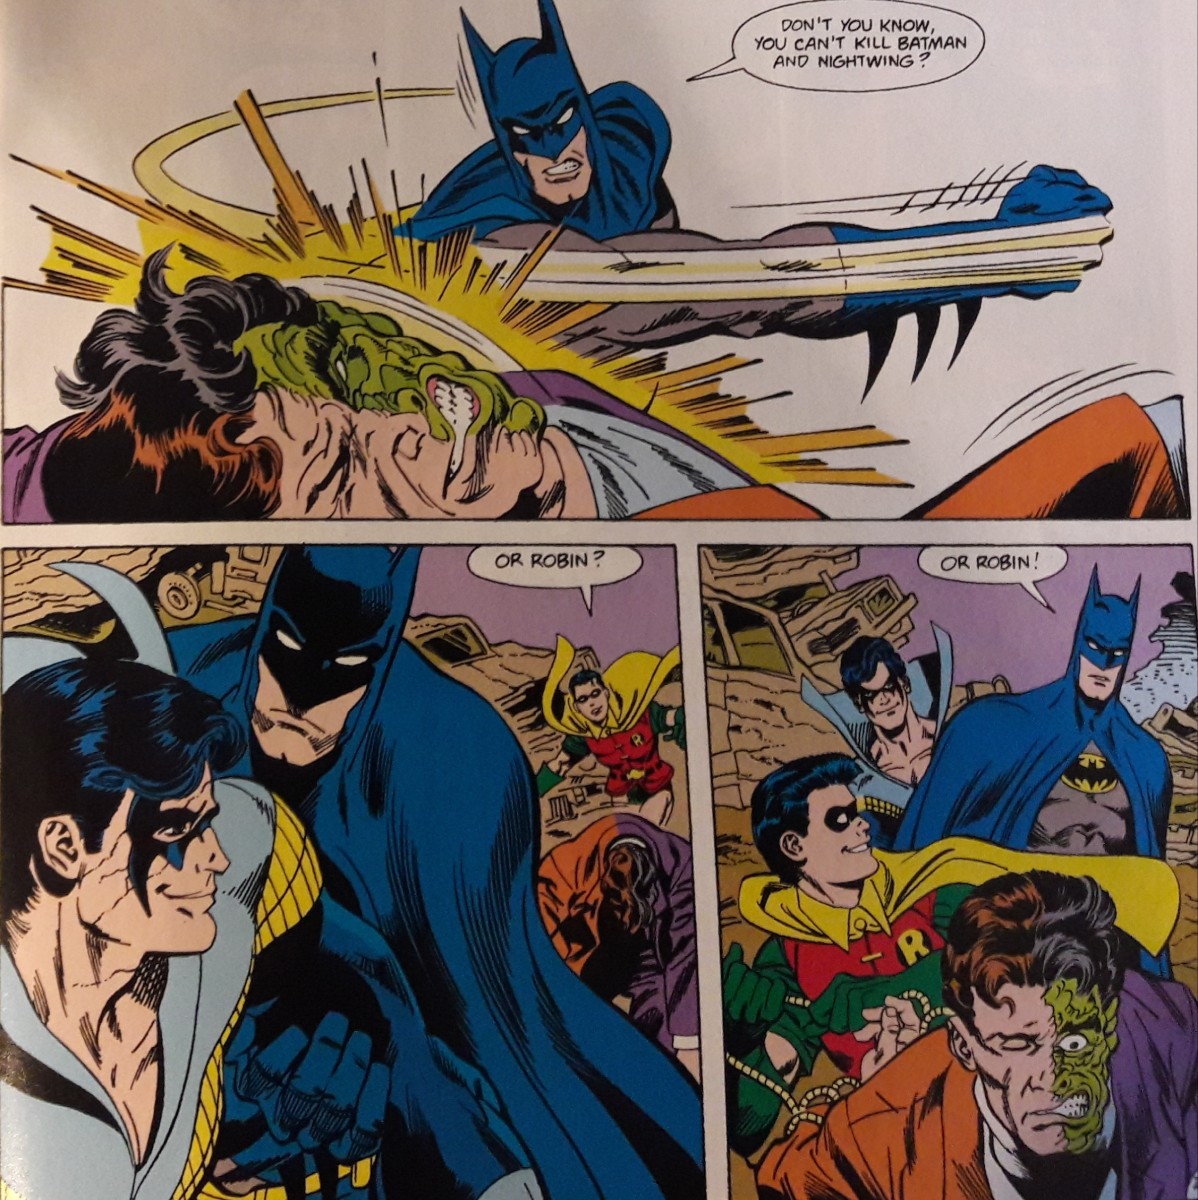 How many Bat-people does it take to clobber Two-Face?